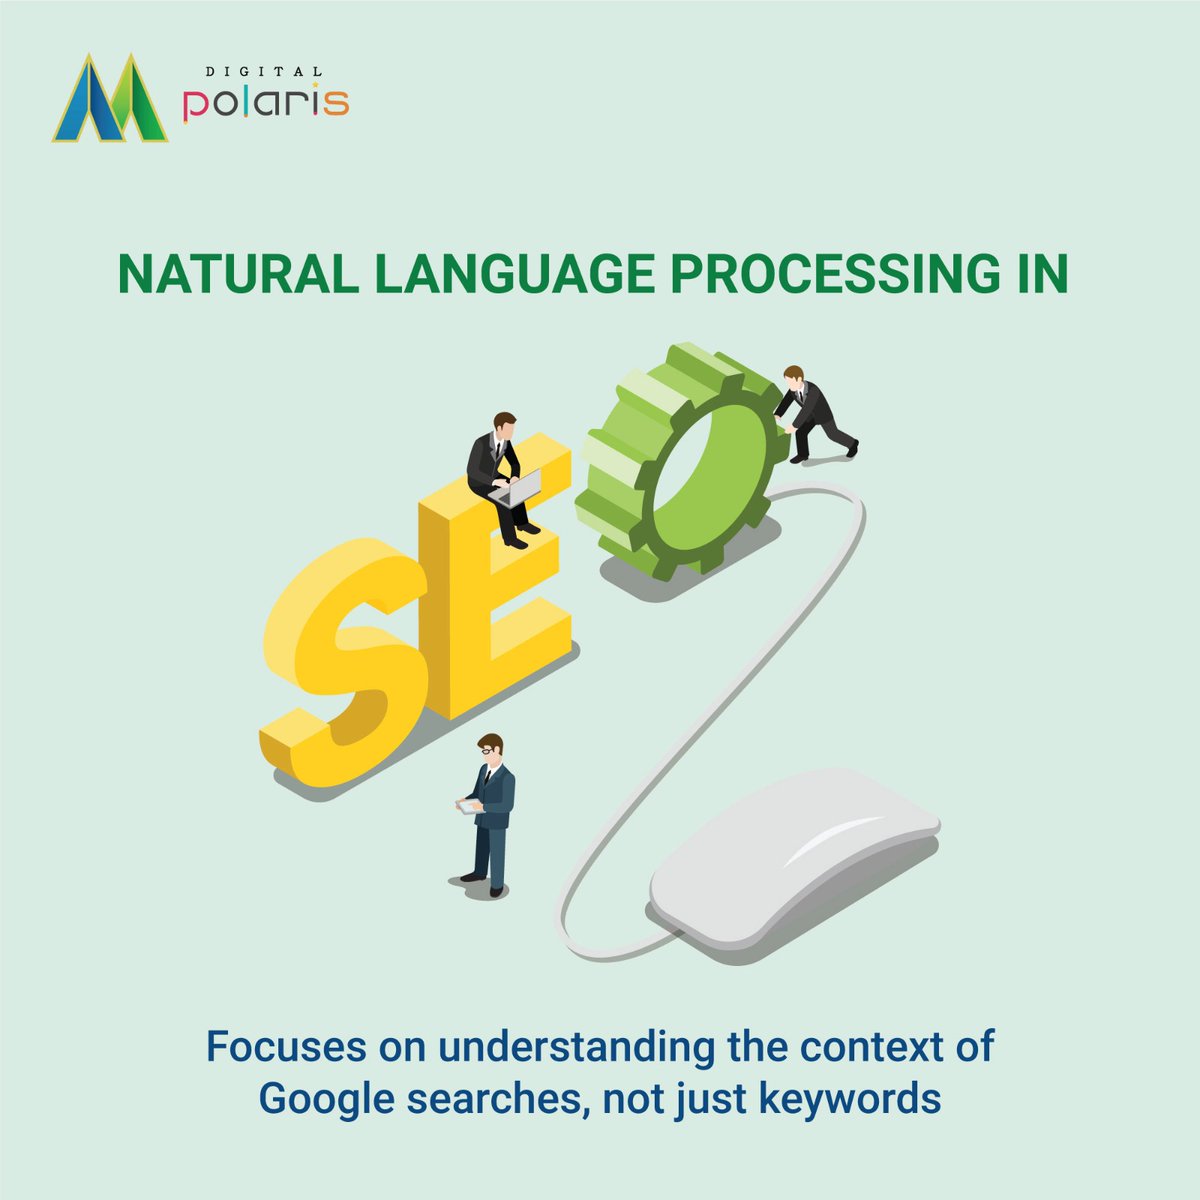 #NaturalLanguageProcessing in #SEO

#NLP helps provide accurate #answers to user queries and refine searches. #Follow #DigitalPolaris.

#digitalmarketing #marketing #socialmediamarketing #socialmedia #webdesign #branding #business #onlinemarketing #contentmarketing #website